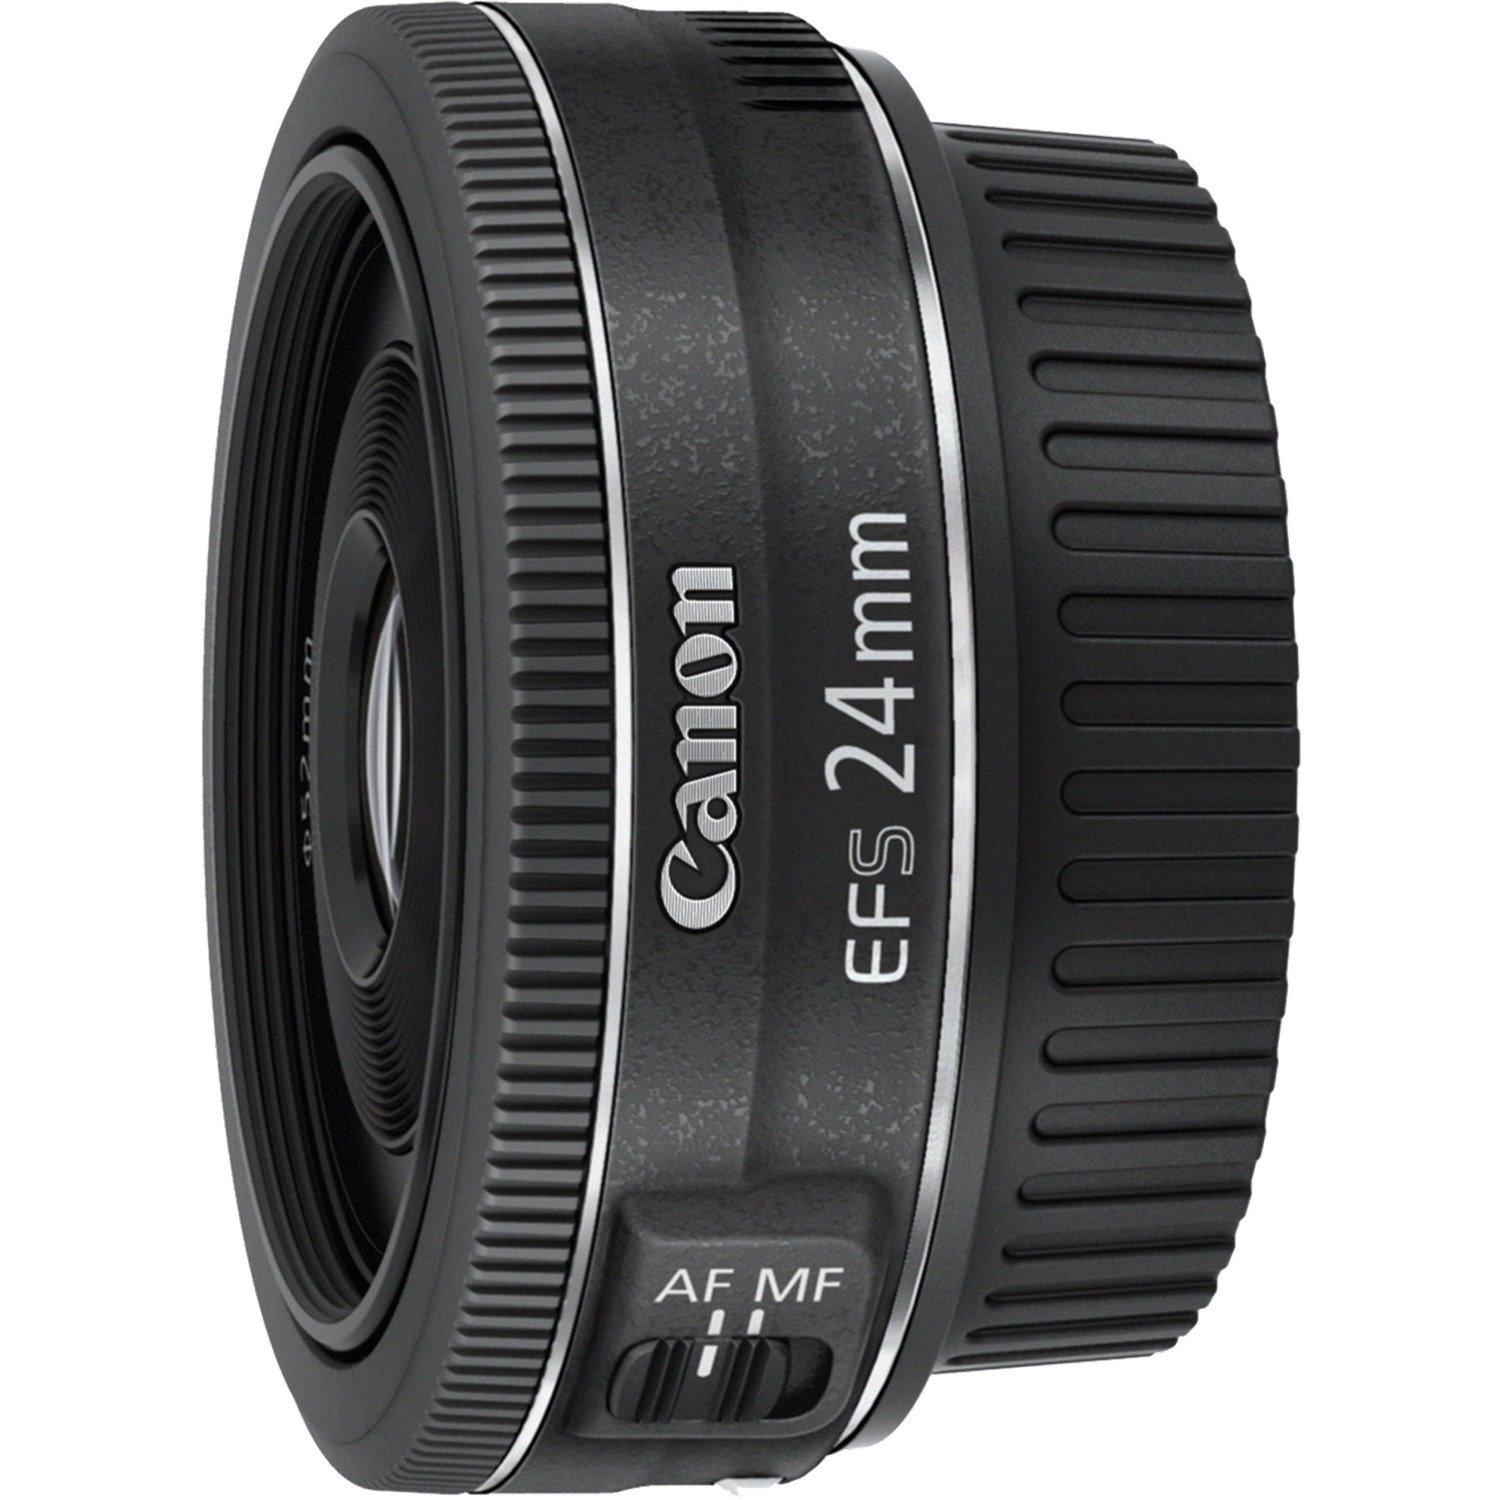 Canon - 24 mm - f/2.8 - Wide Angle Fixed Lens